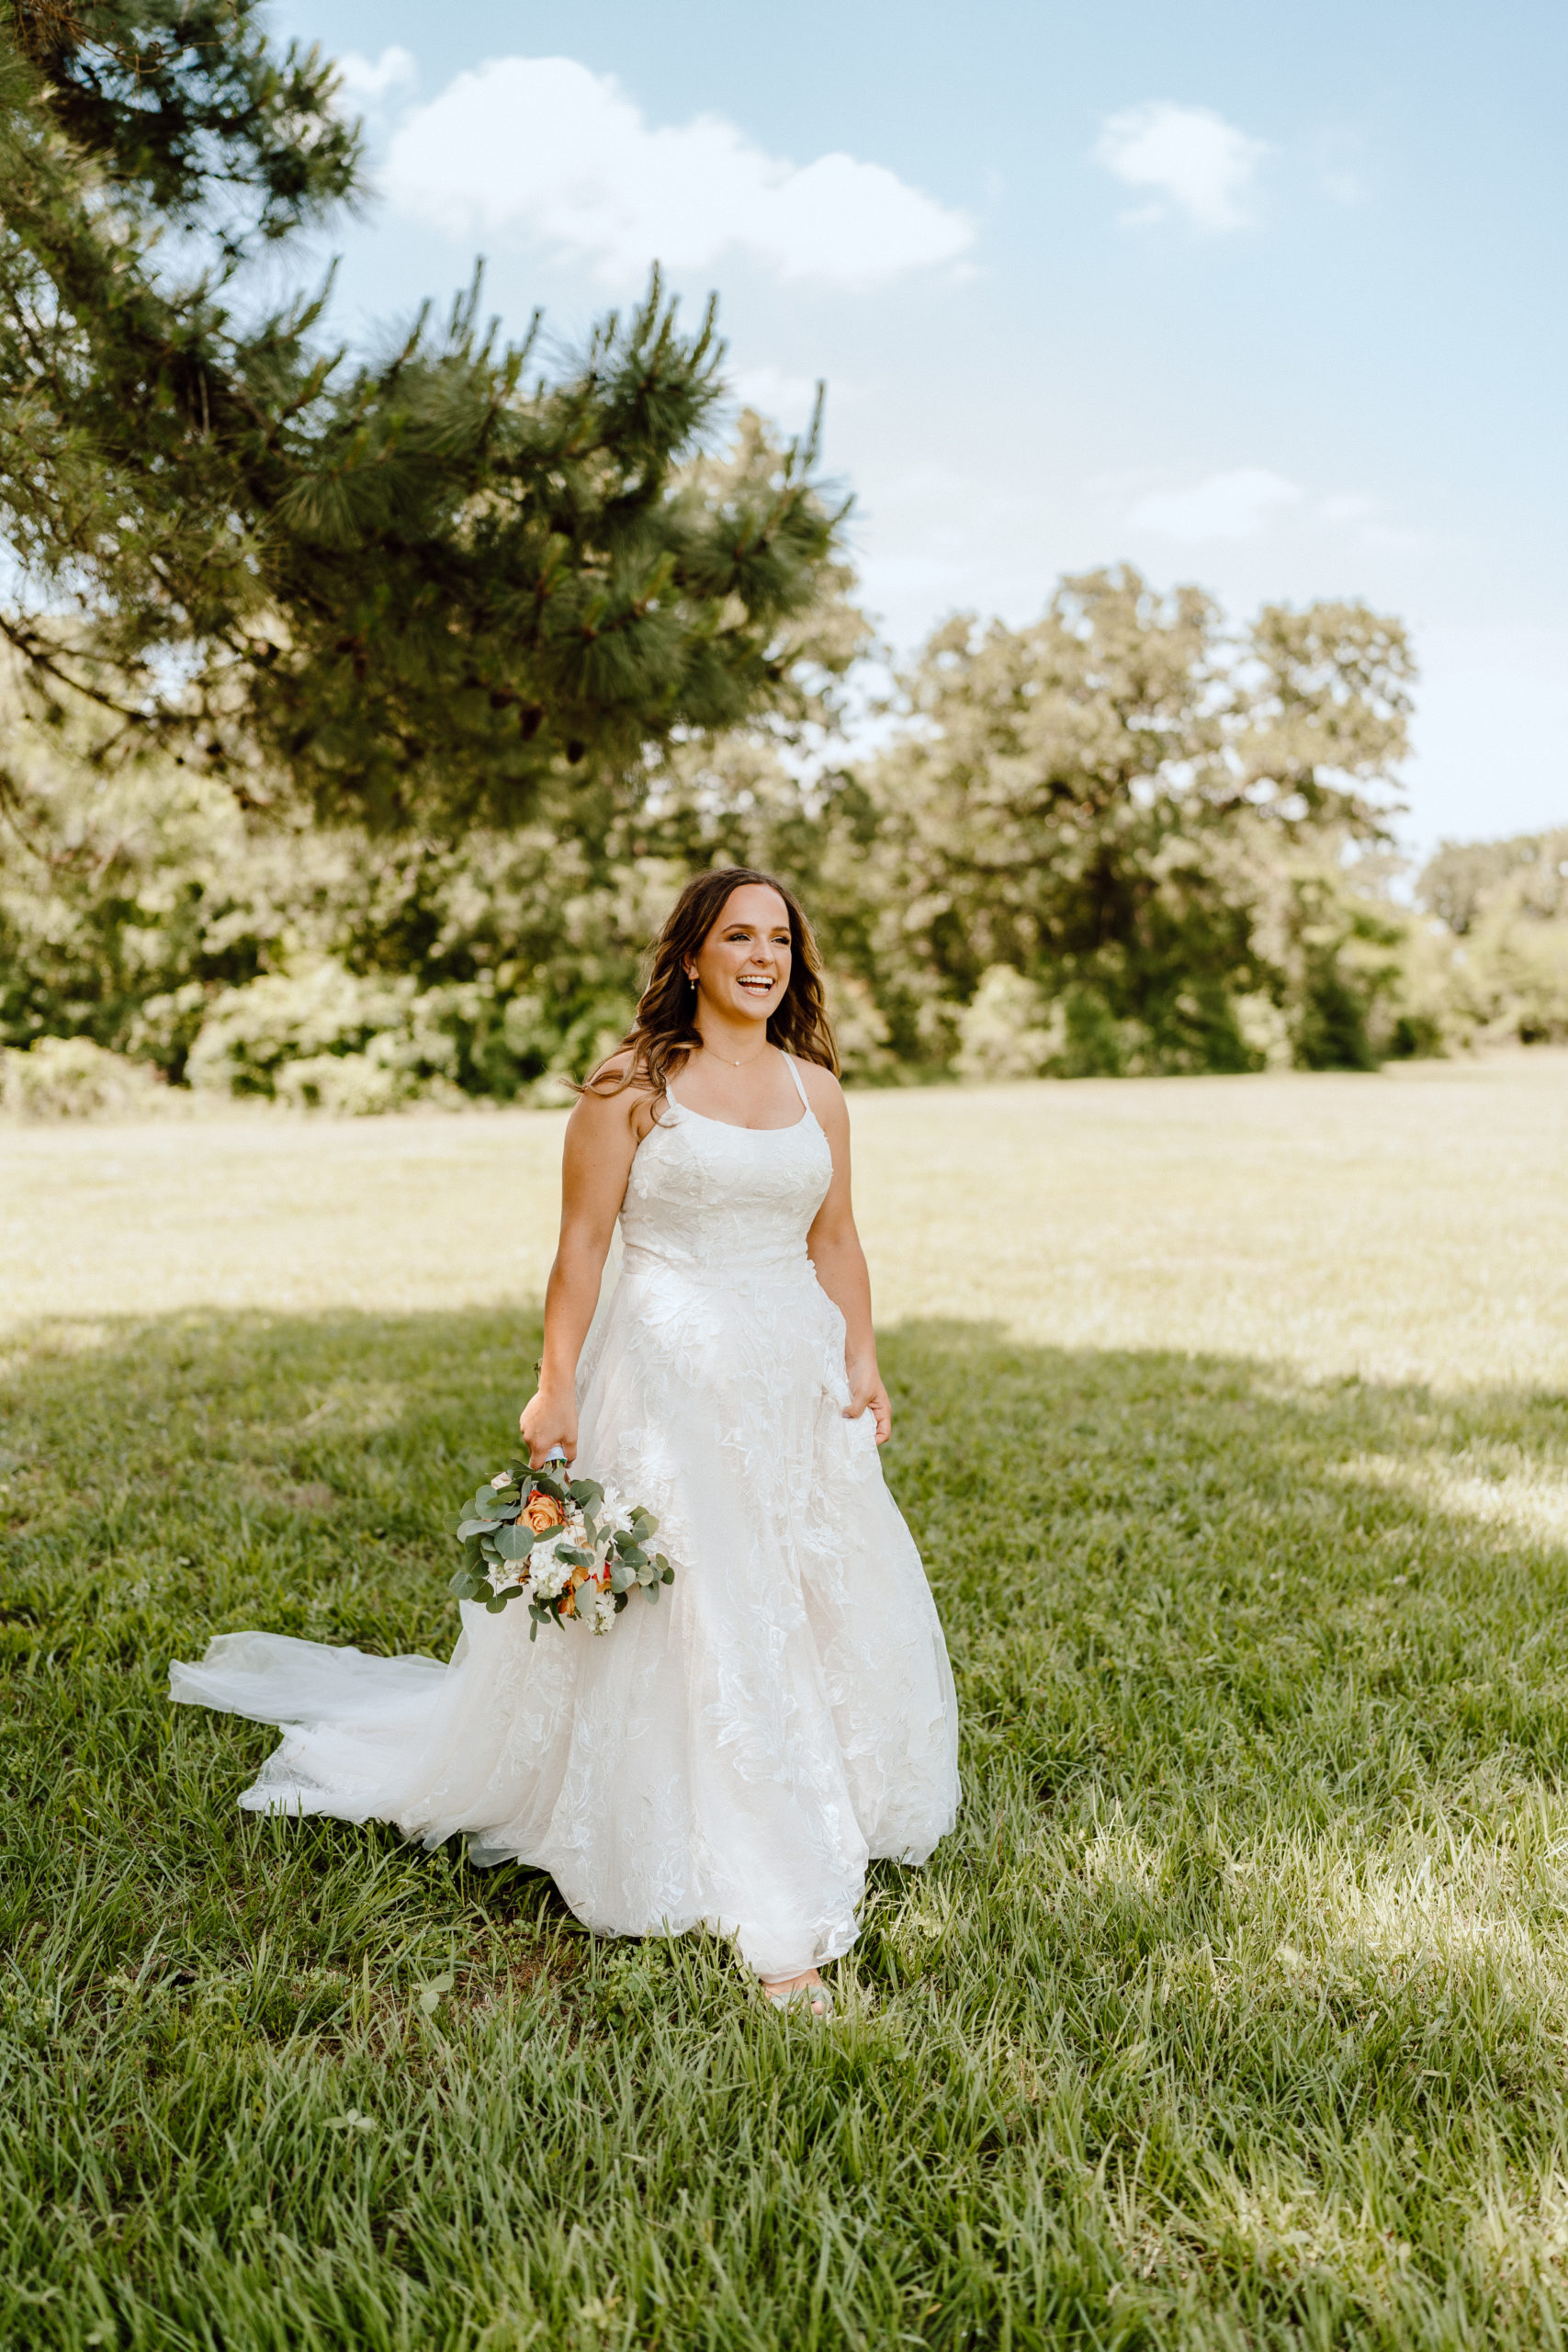 This timeless backyard wedding took place in the gorgeous Texas hill country. While the stunning venue held well over 200 guests, this beautiful Texas wedding had the charm and feel of an intimate backyard wedding. Each photo is full to the brim with candid storytelling in an editorial style. Angelina Loreta Photography created timeless wedding photos for the Austin couple.